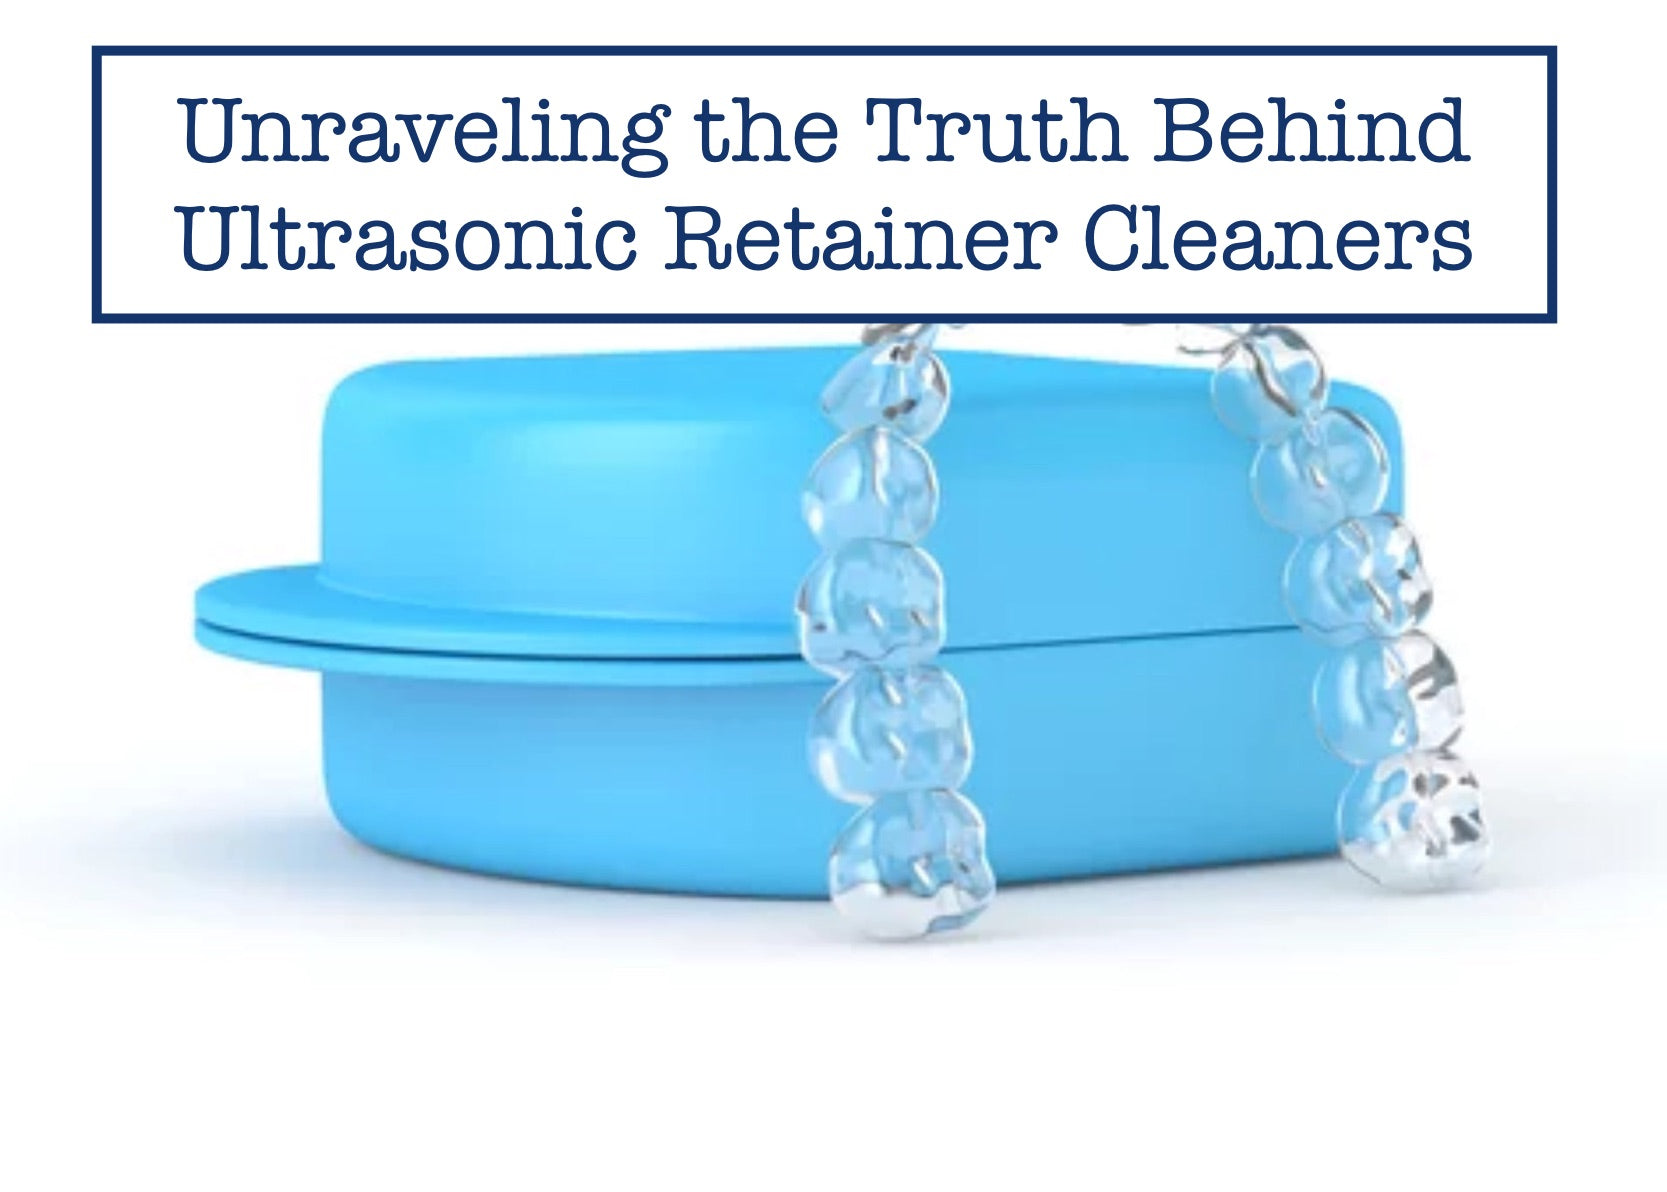 Unraveling the Truth Behind Ultrasonic Retainer Cleaners